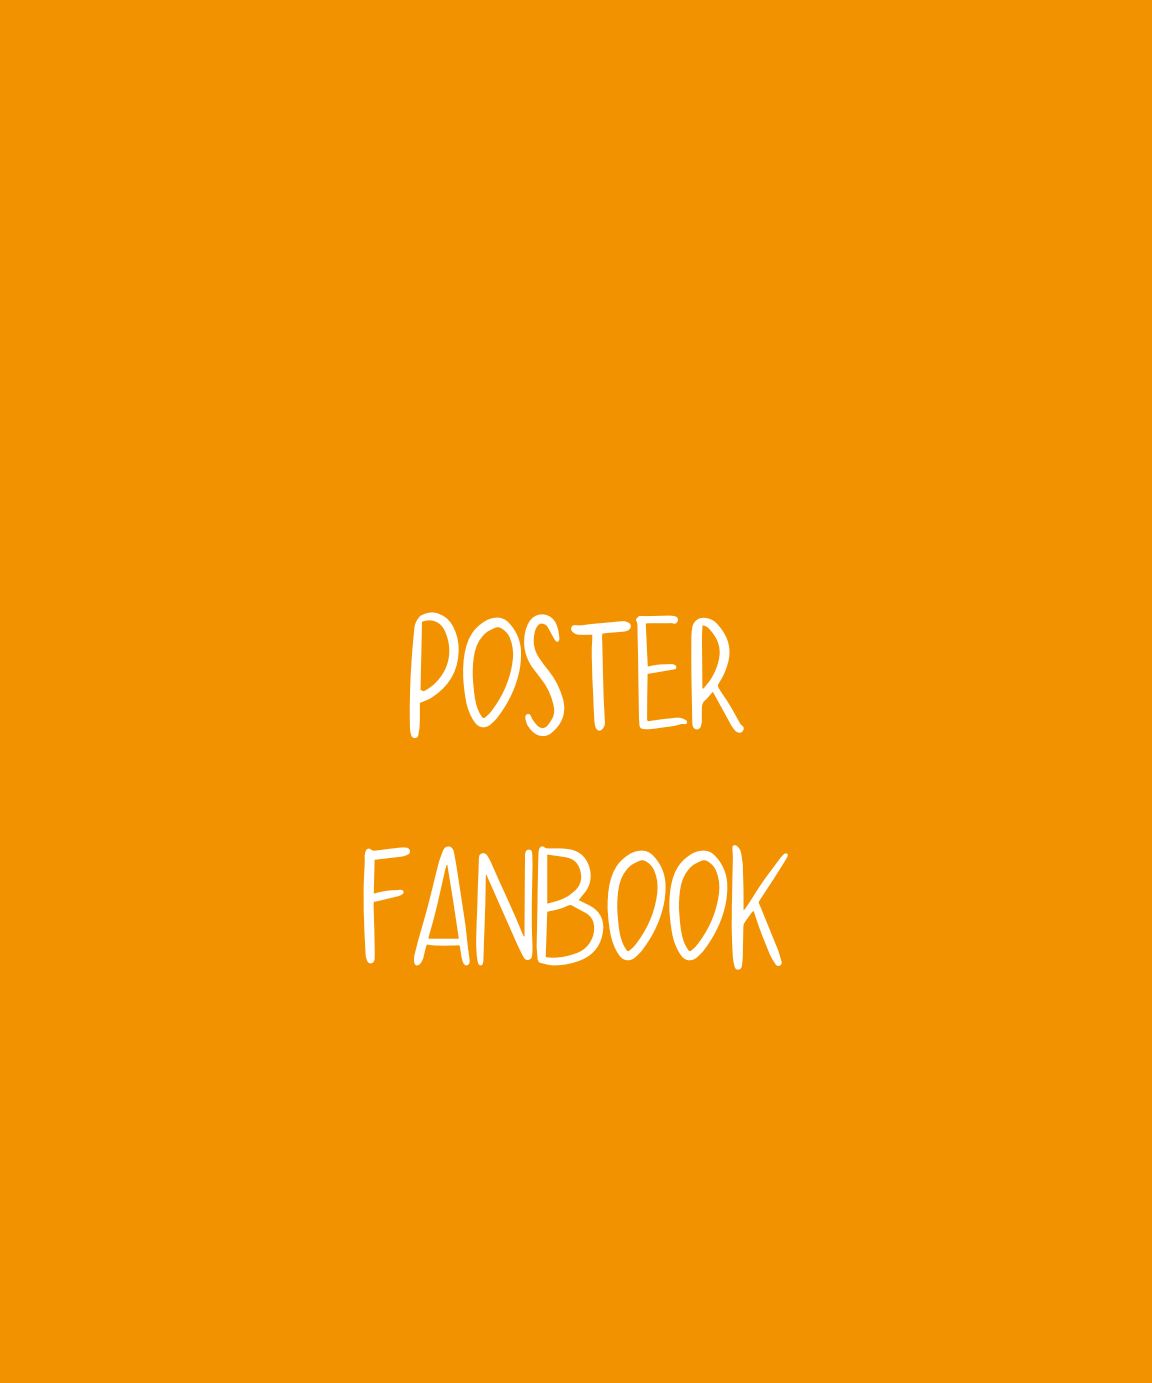 Poster Fanbook